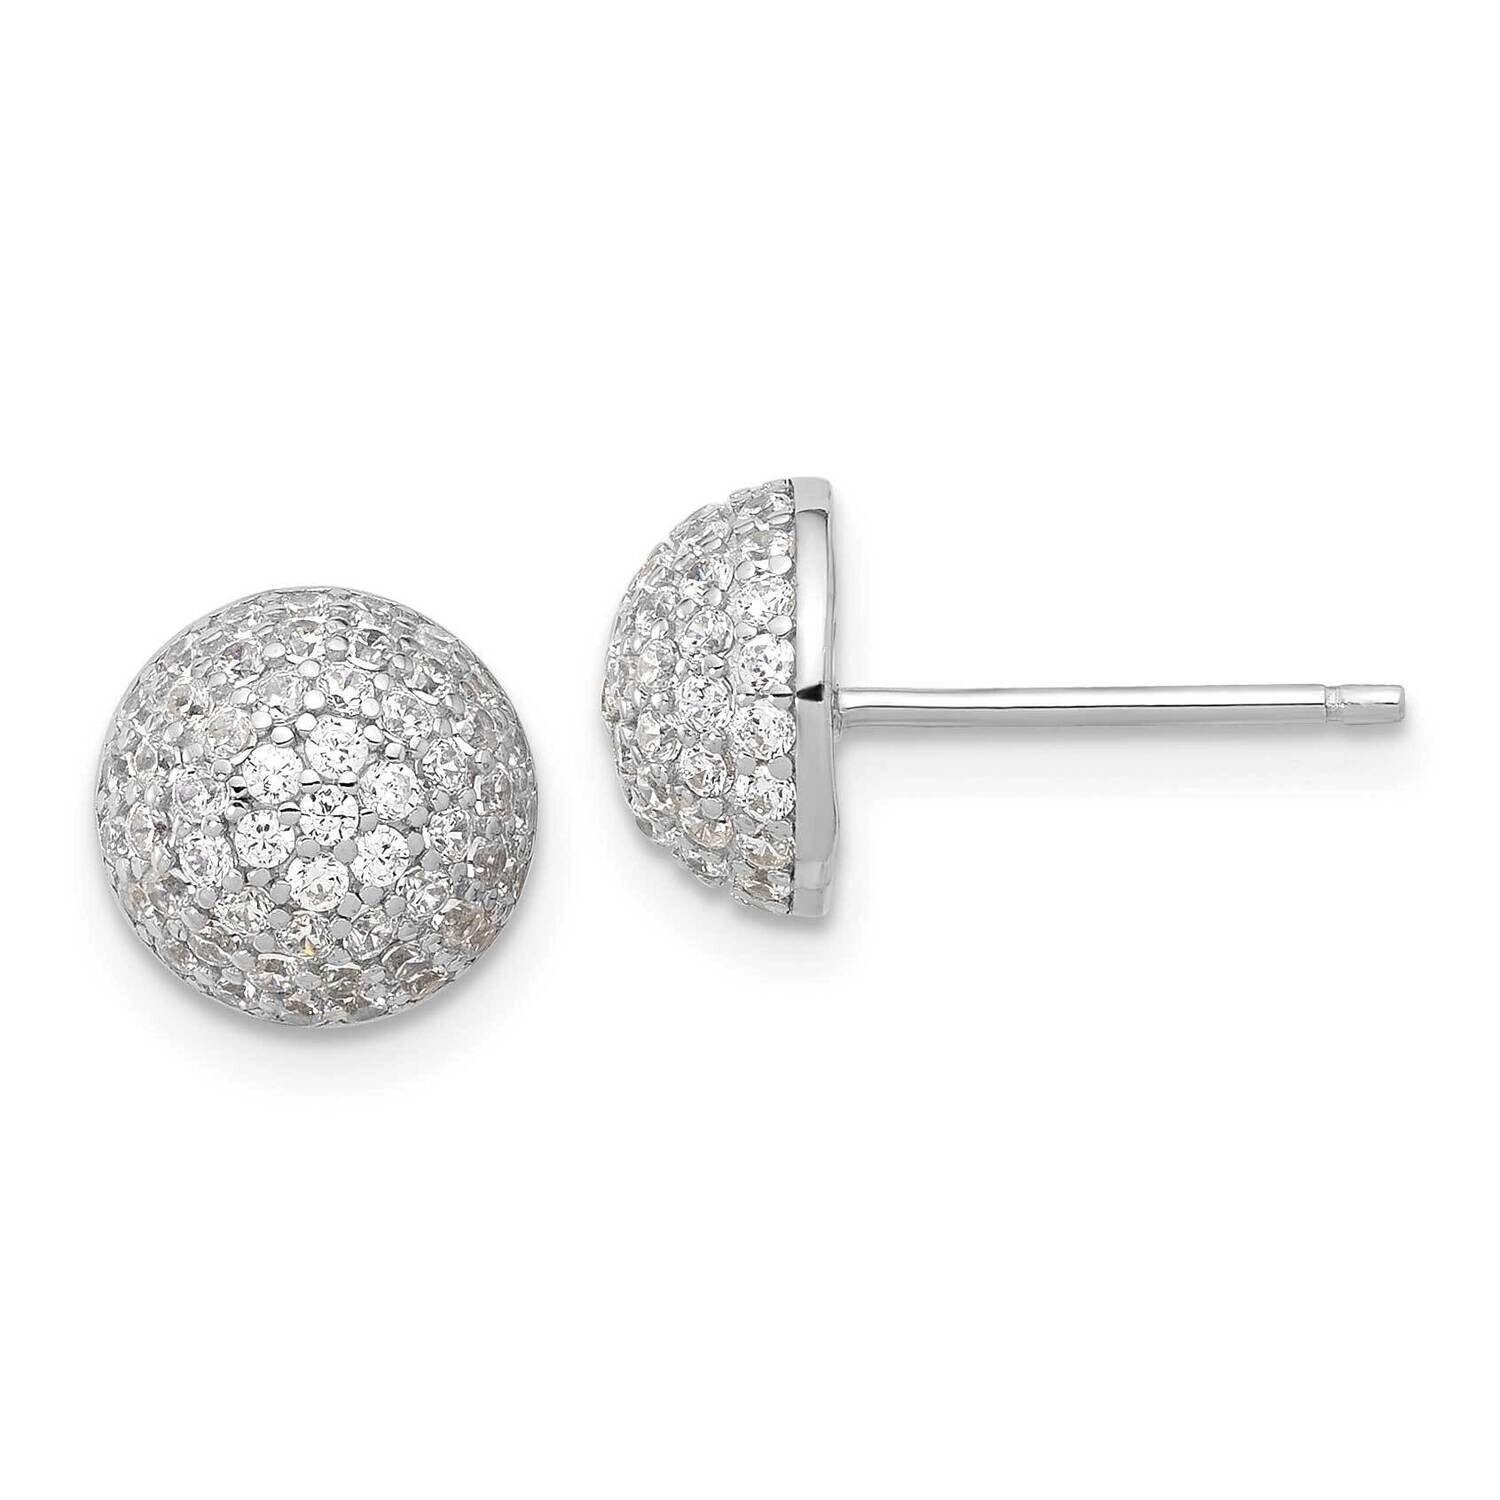 Pavc CZ Domed Post Earrings Sterling Silver Rhodium-Plated QE17030